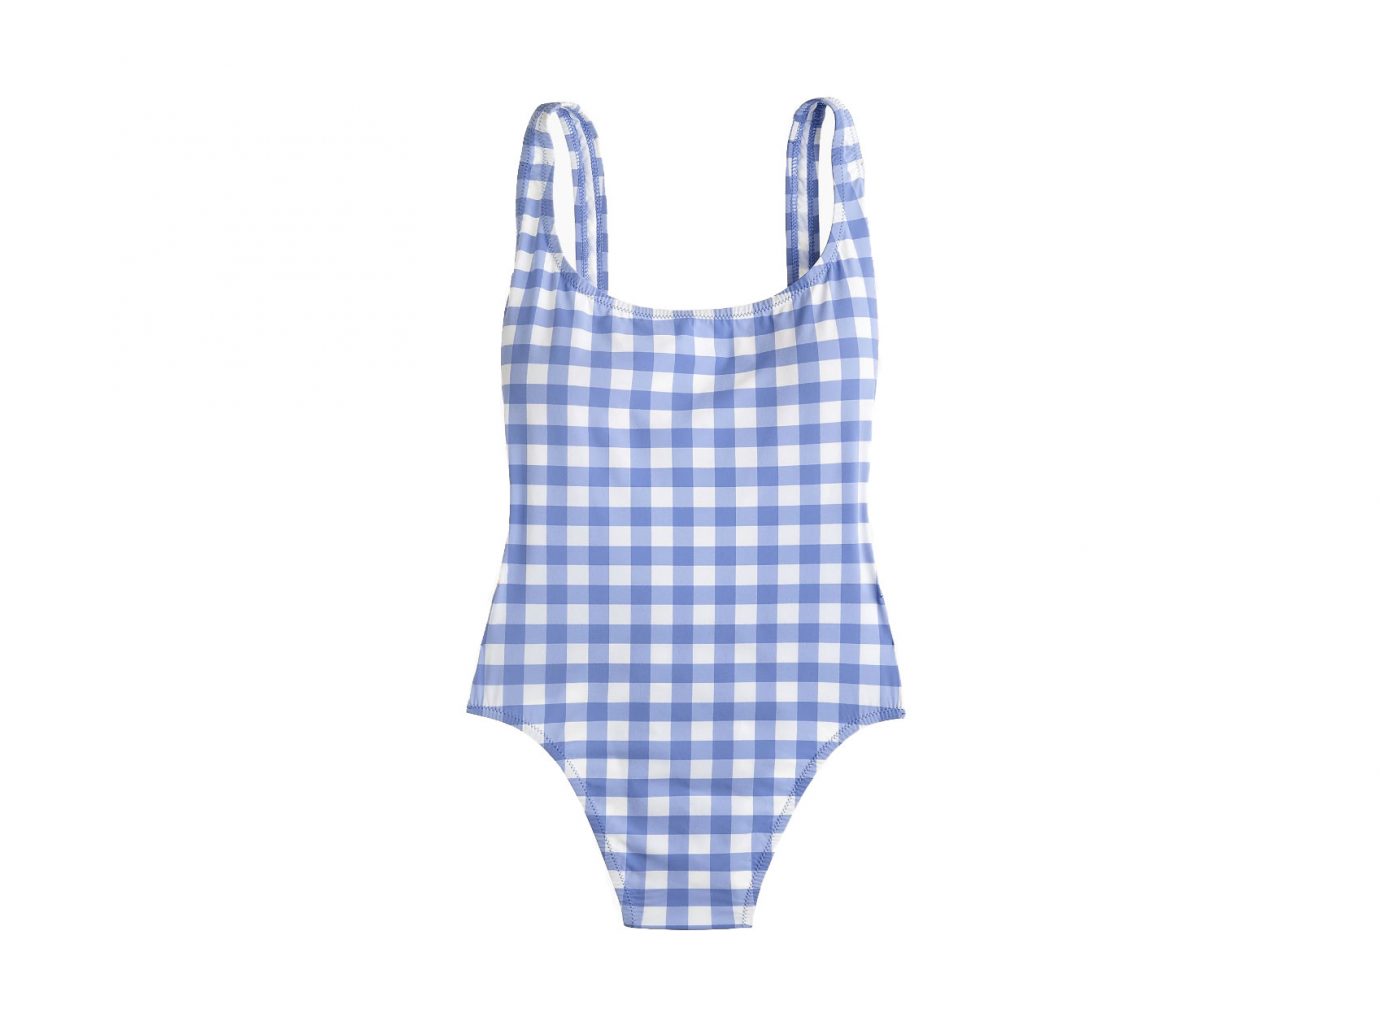 J.Crew Scoopback One-piece Gingham Swimsuit